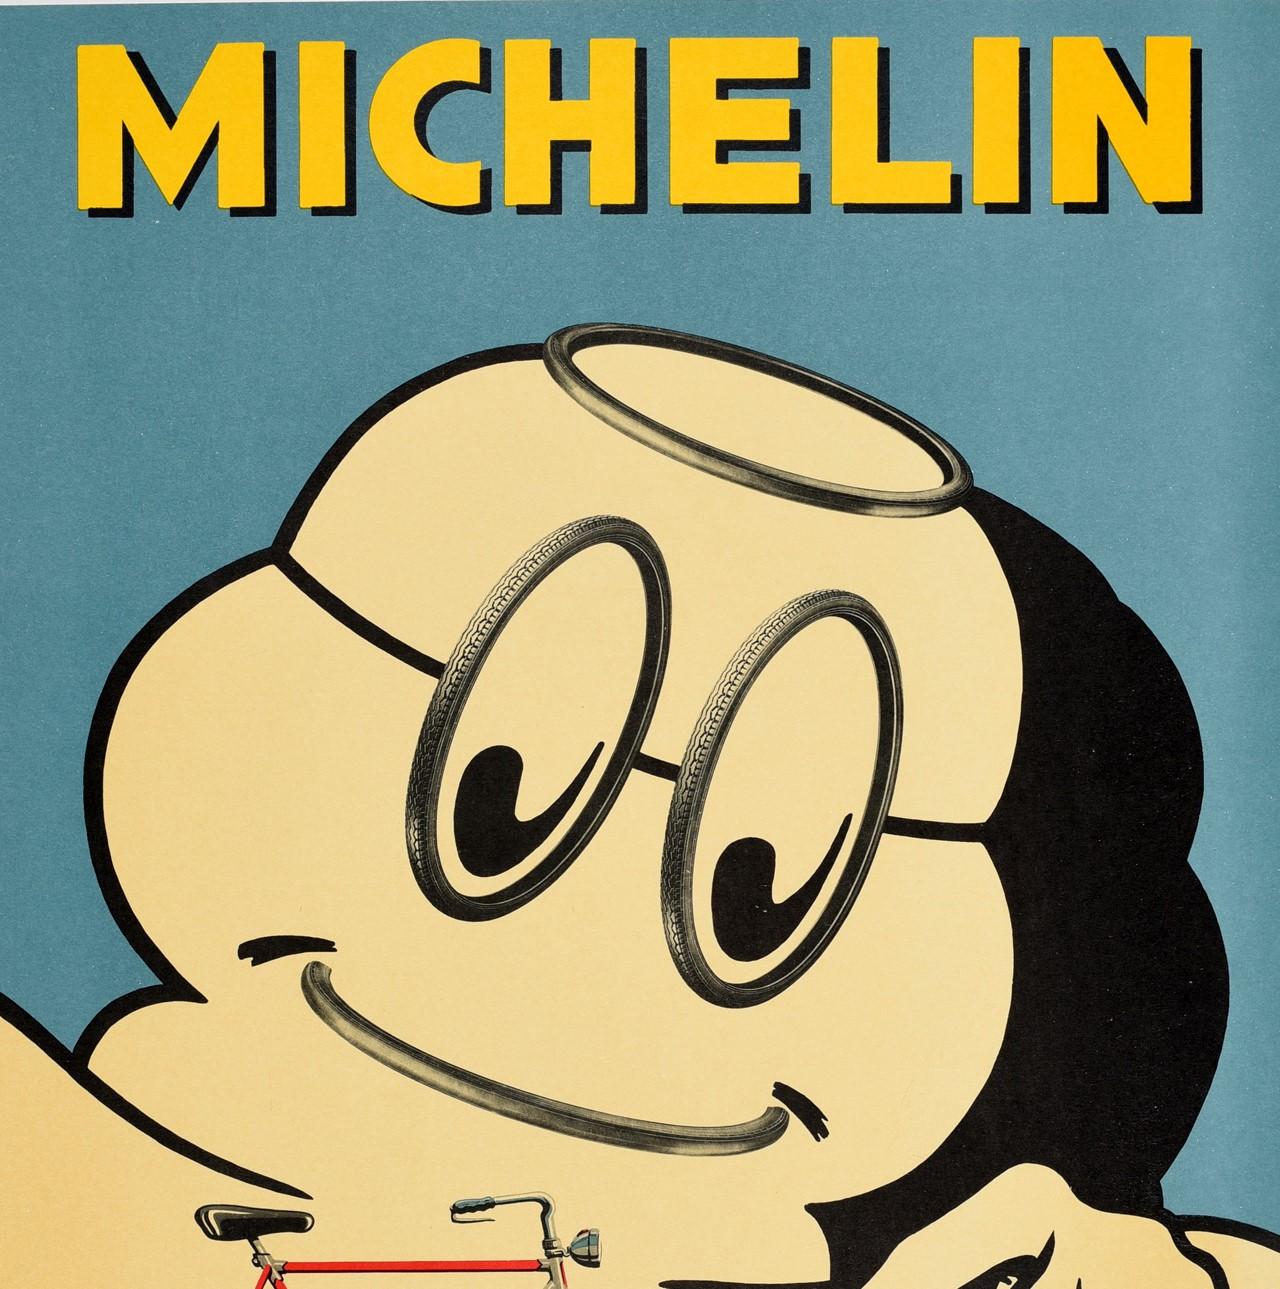 Original vintage poster for Michelin Pneumatici Velo bicycle tyres featuring a fun and colorful design depicting the Michelin Man Bibendum character smiling and touching a new red bicycle with his eyes as bike tires and the bold title text above and